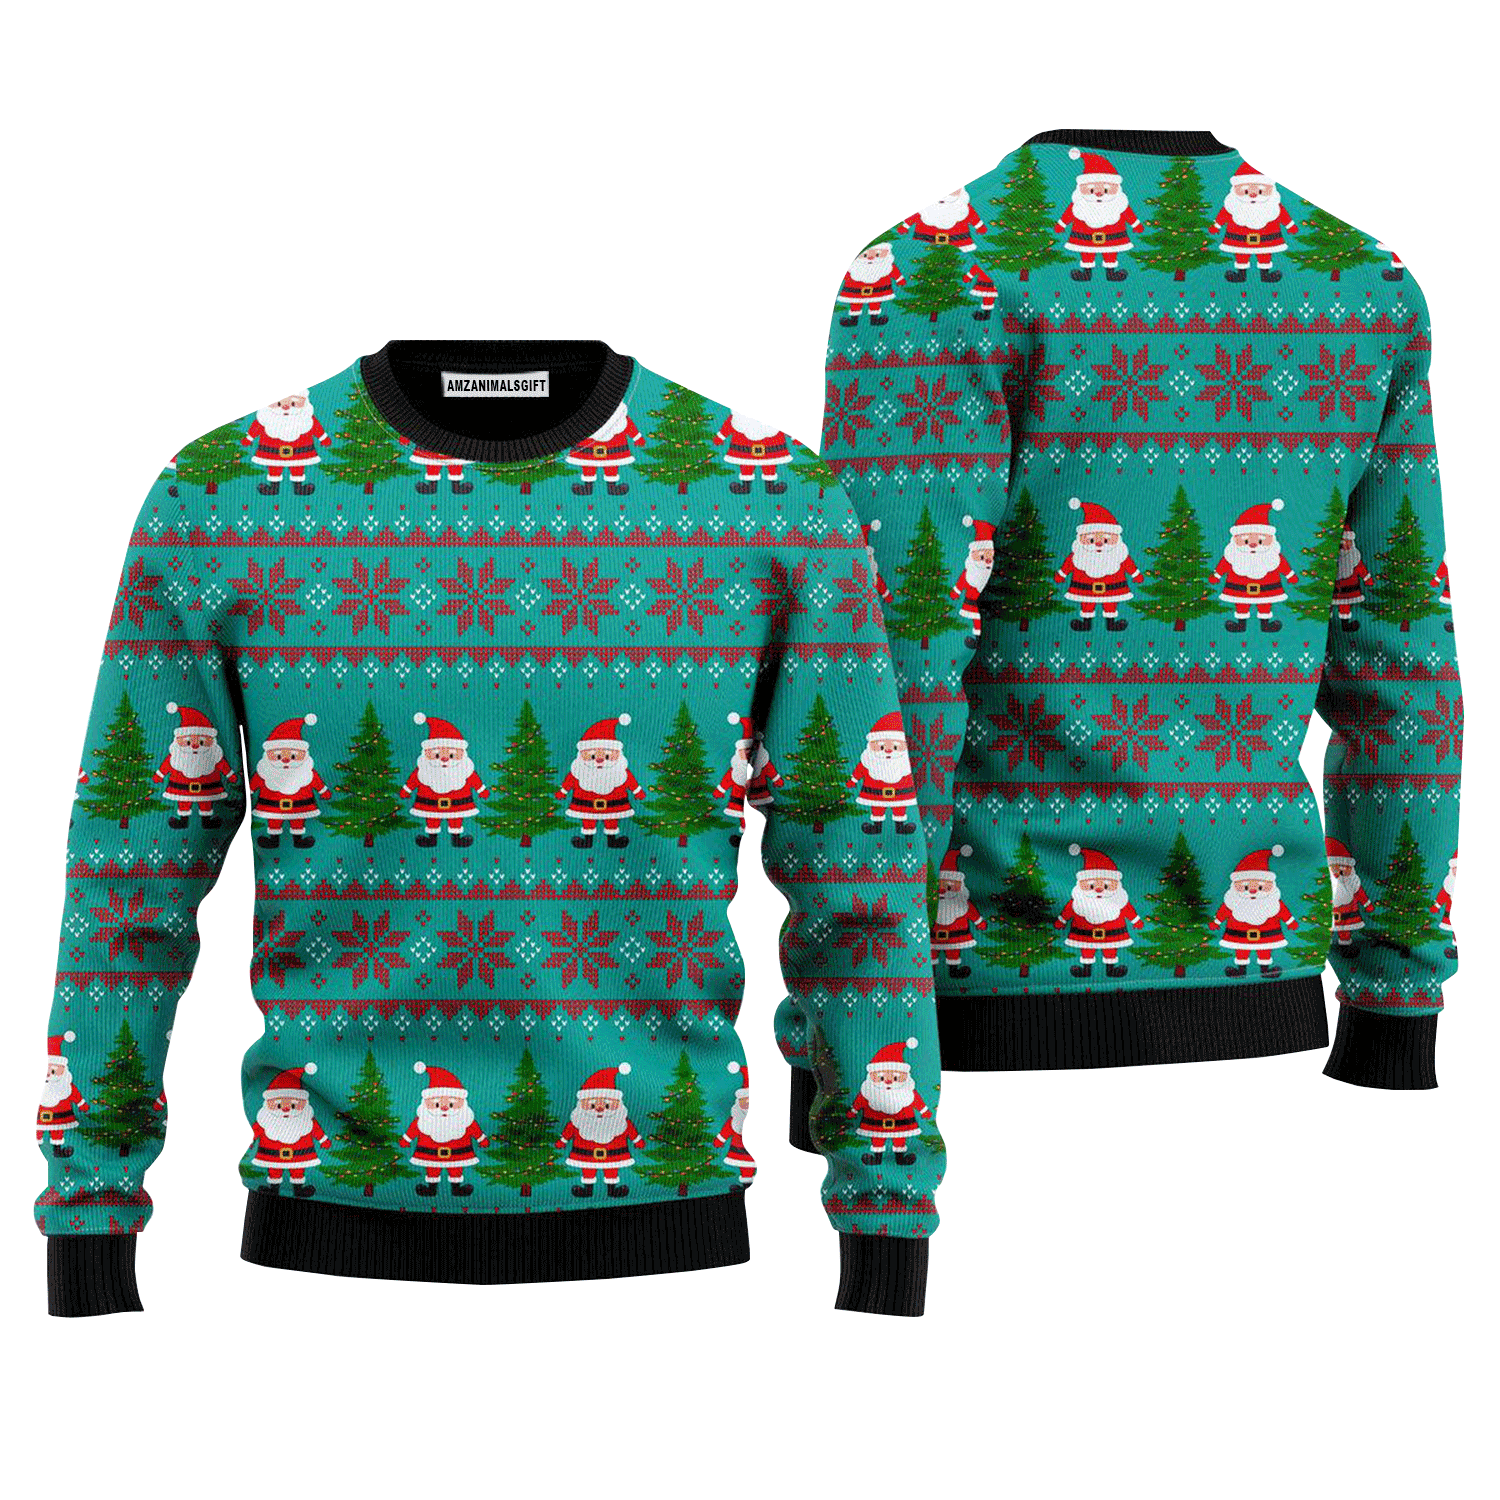 Green Santa Claus Merry Christmas Sweater, Ugly Sweater For Men & Women, Perfect Outfit For Christmas New Year Autumn Winter